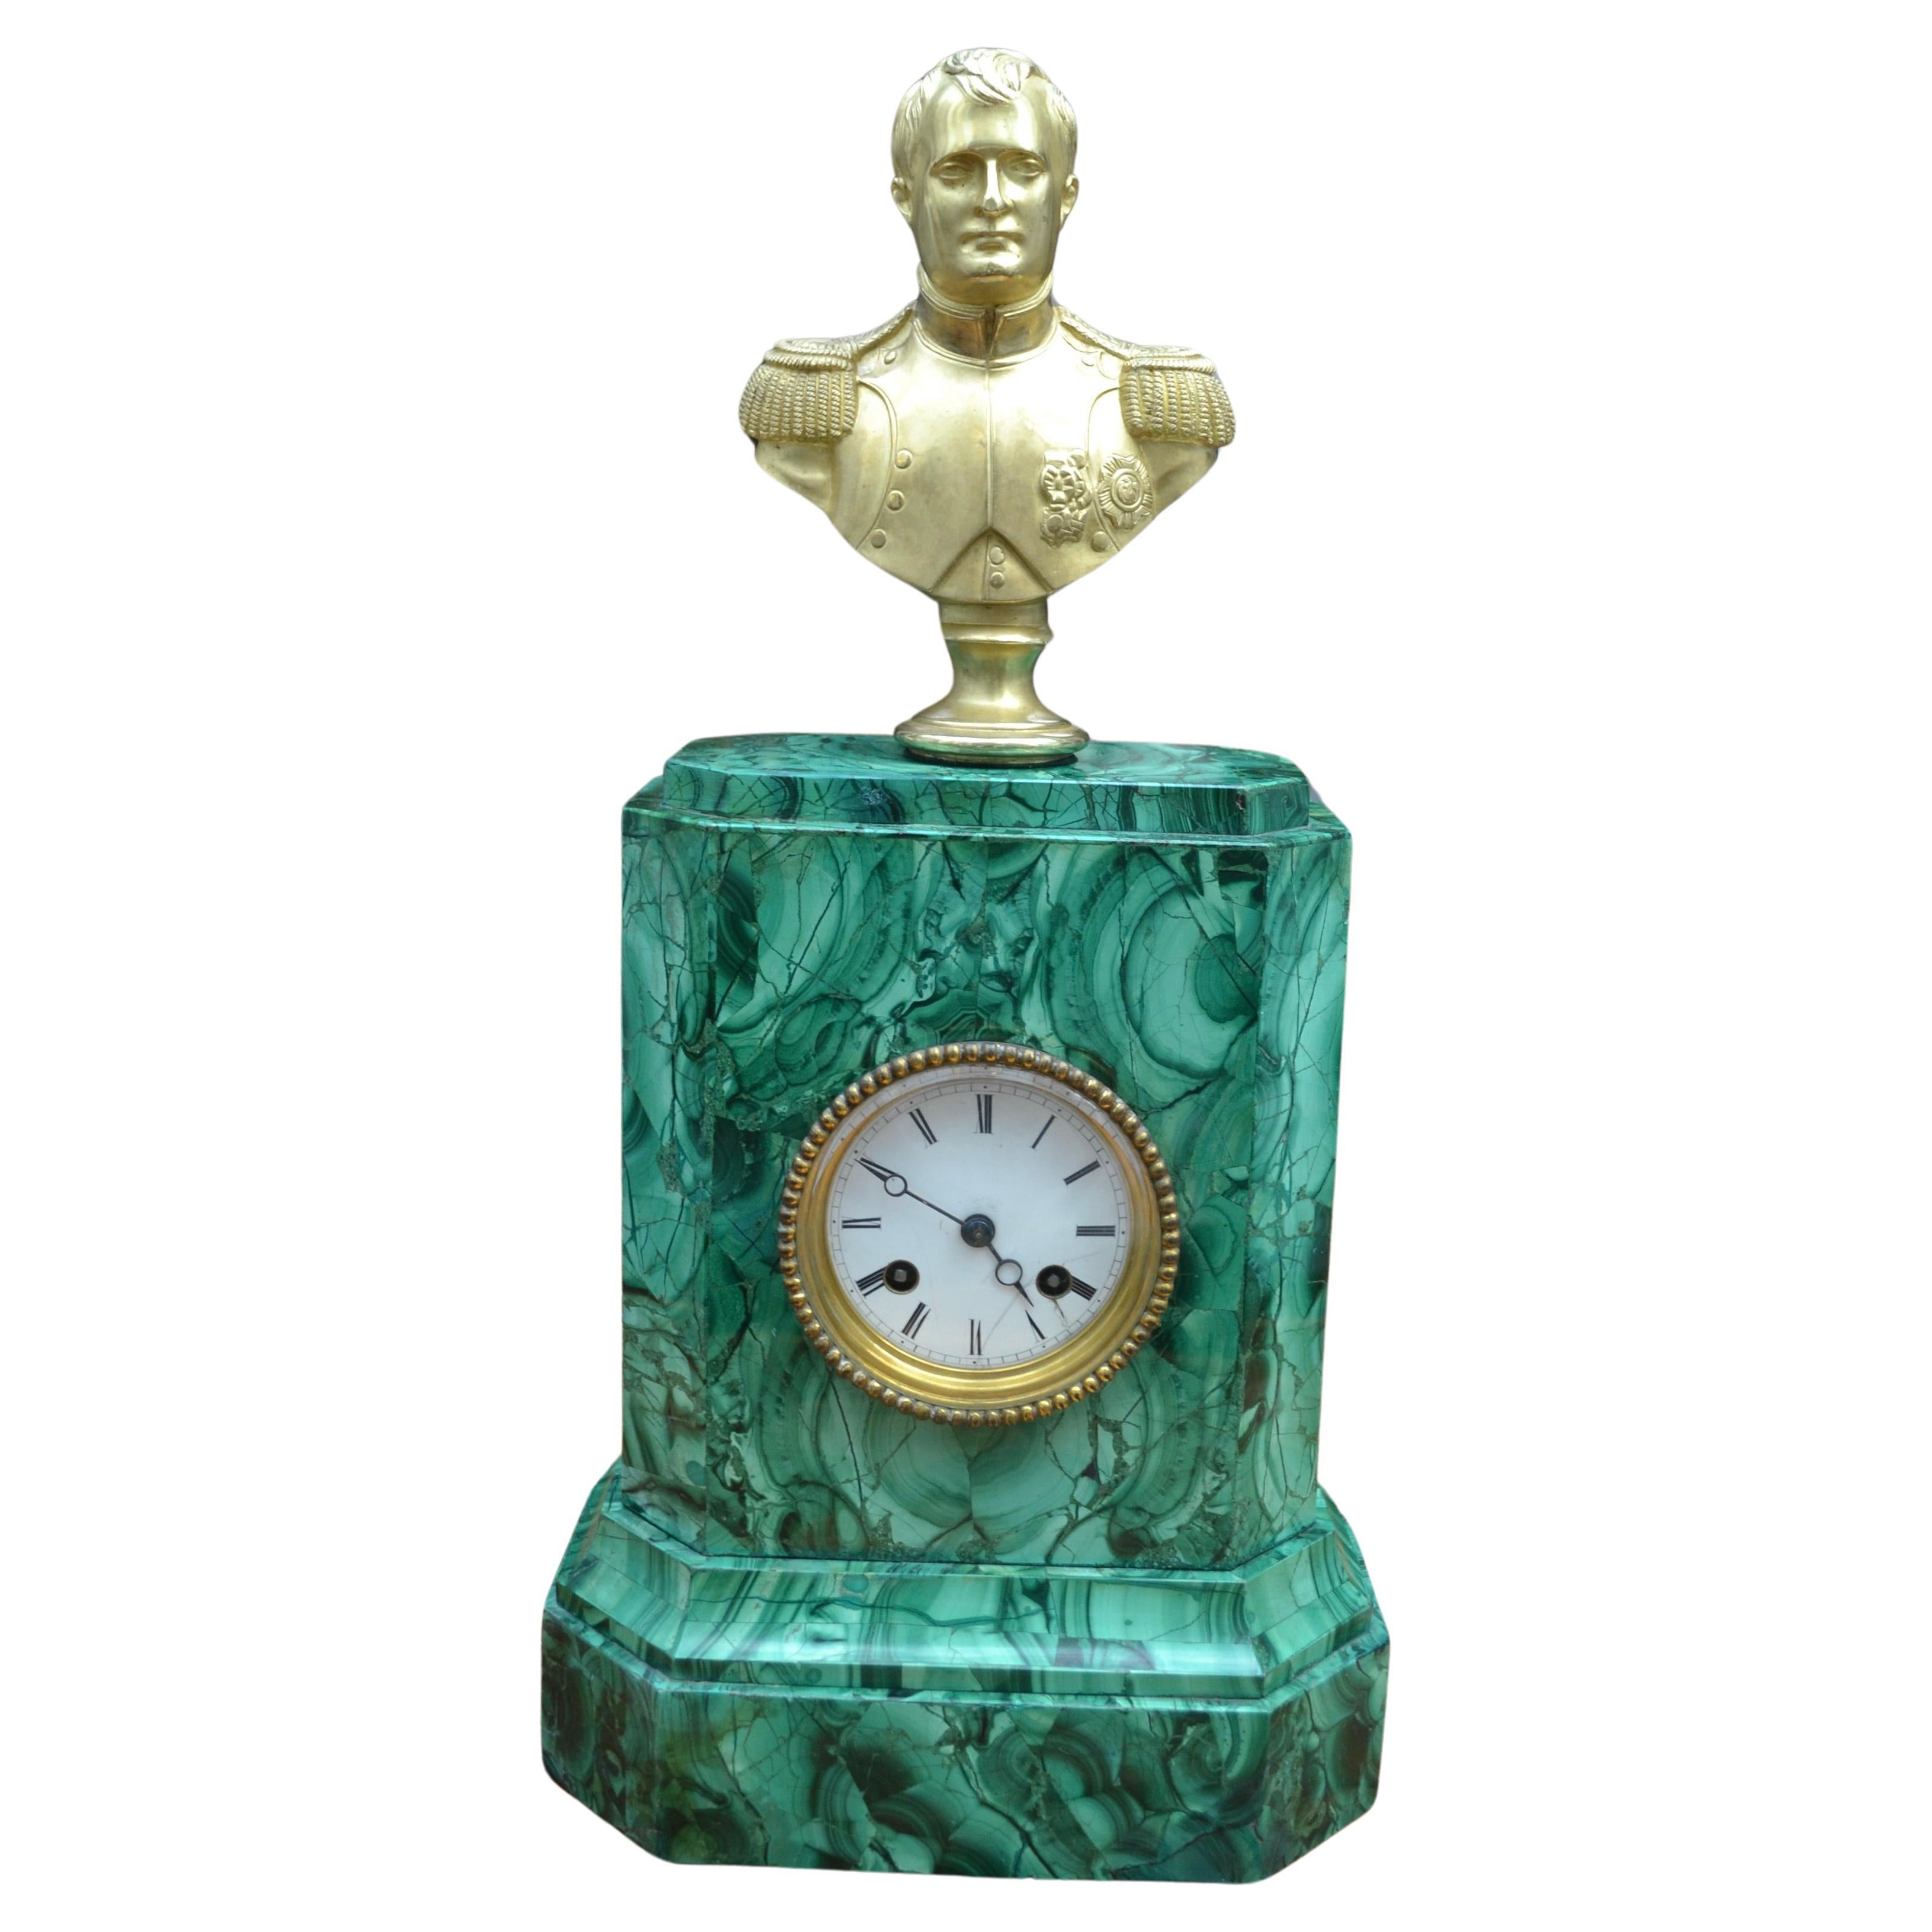 A simple yet elegant relatively rare malachite cased clock topped by a gilt bronze bust of a young Napoleon in uniform after the marble original work by  Jean Antoine Houdon.